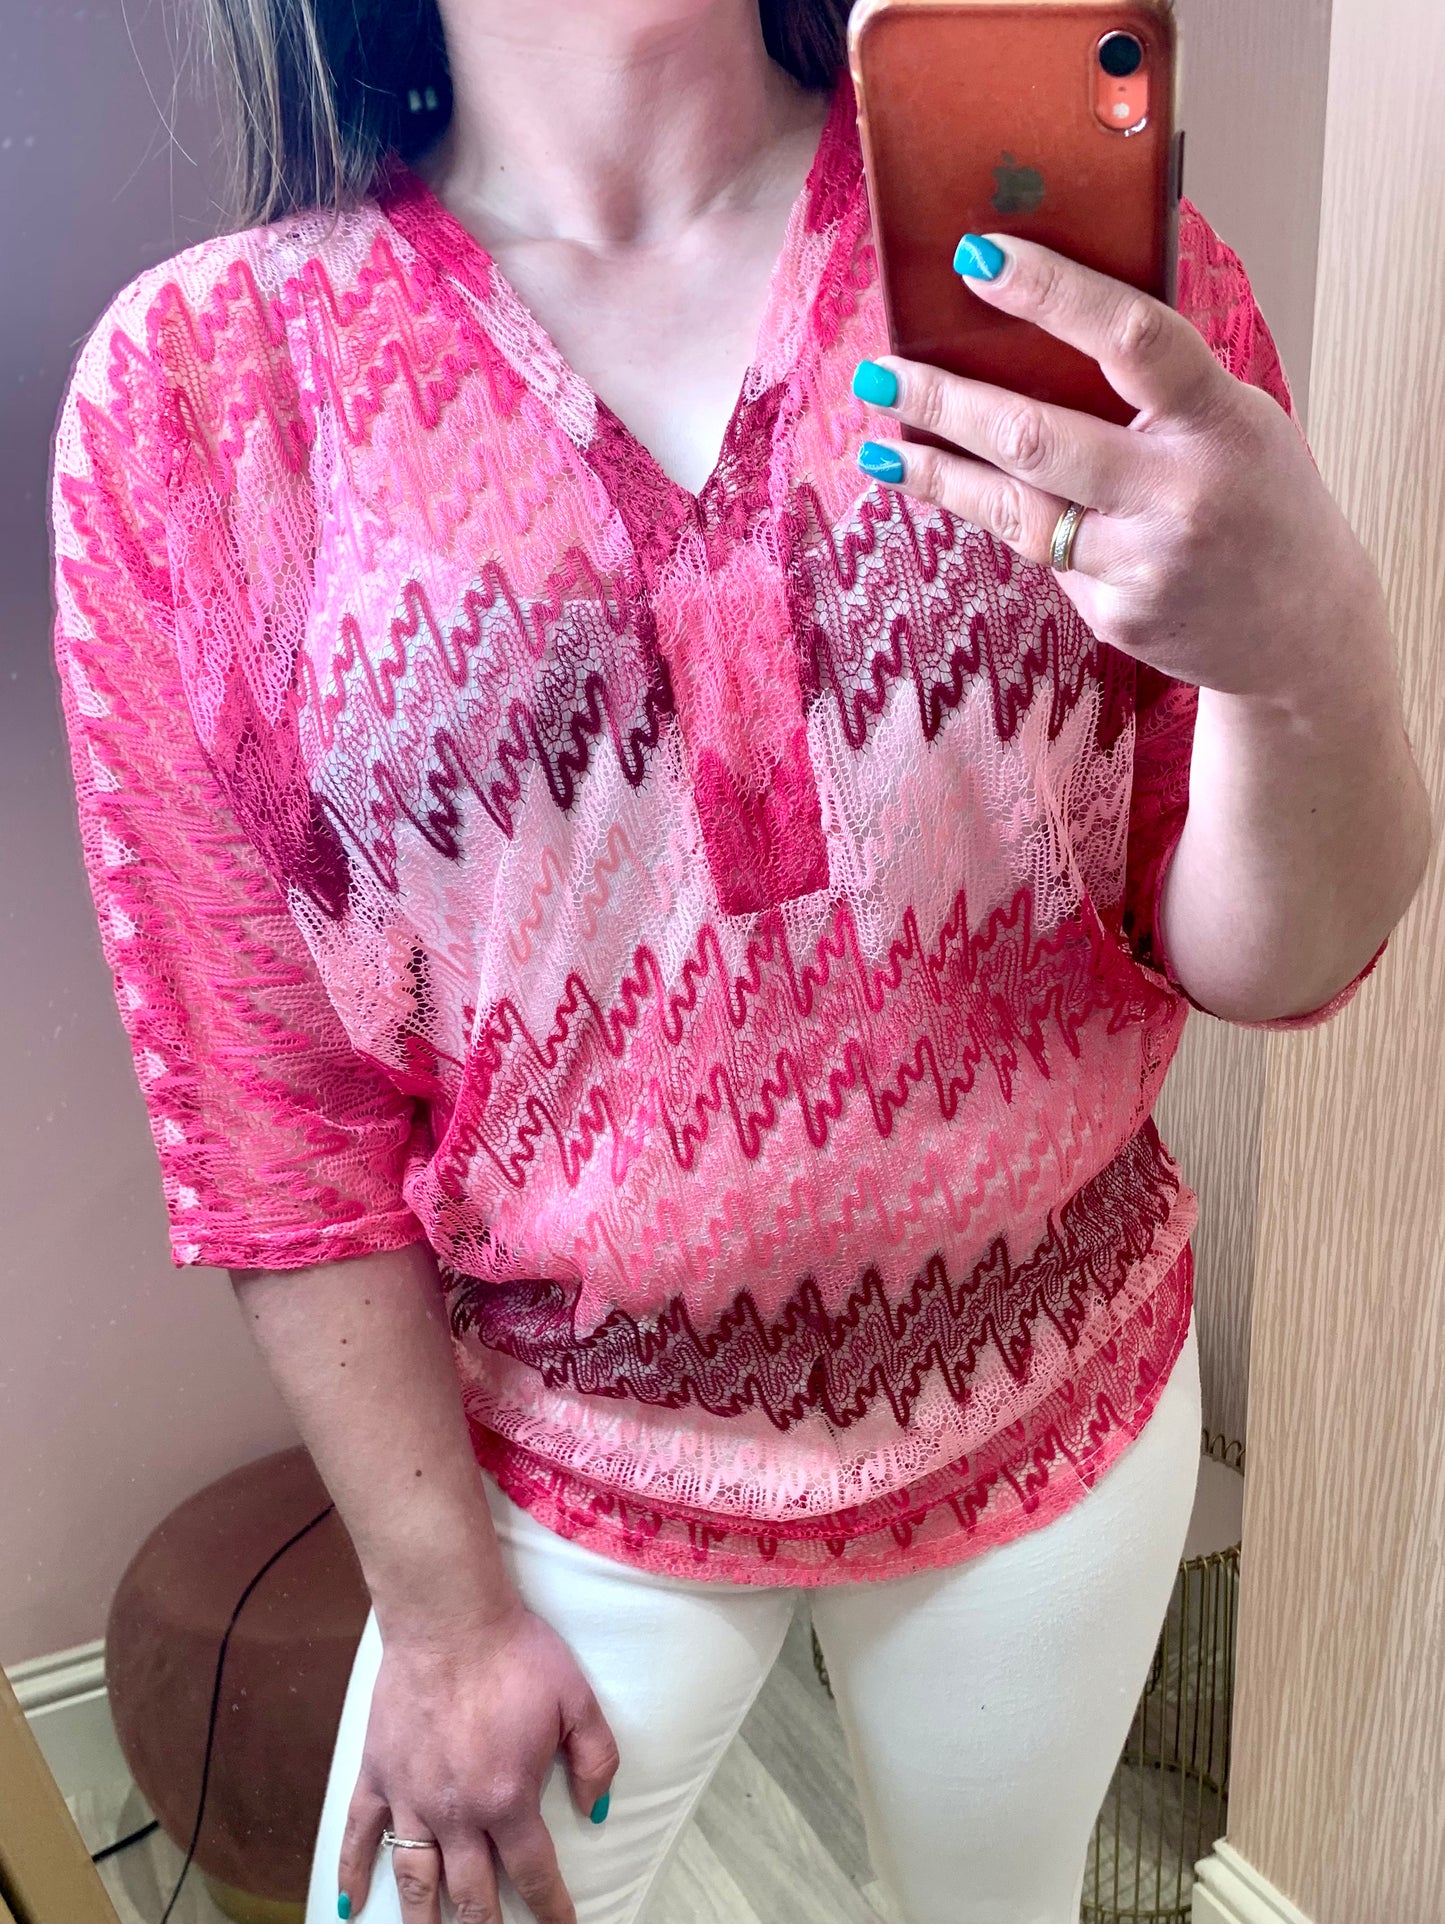 Close up of a female stood in front of a pink wall and taking a photo of herself on her phone in the mirror.  She is wearing white skinny trousers and a crochet knit v-neck top.  It has three quarter length sleeves and is a zig zag knit with differing shades of pink.  Her free hand is on her thigh.